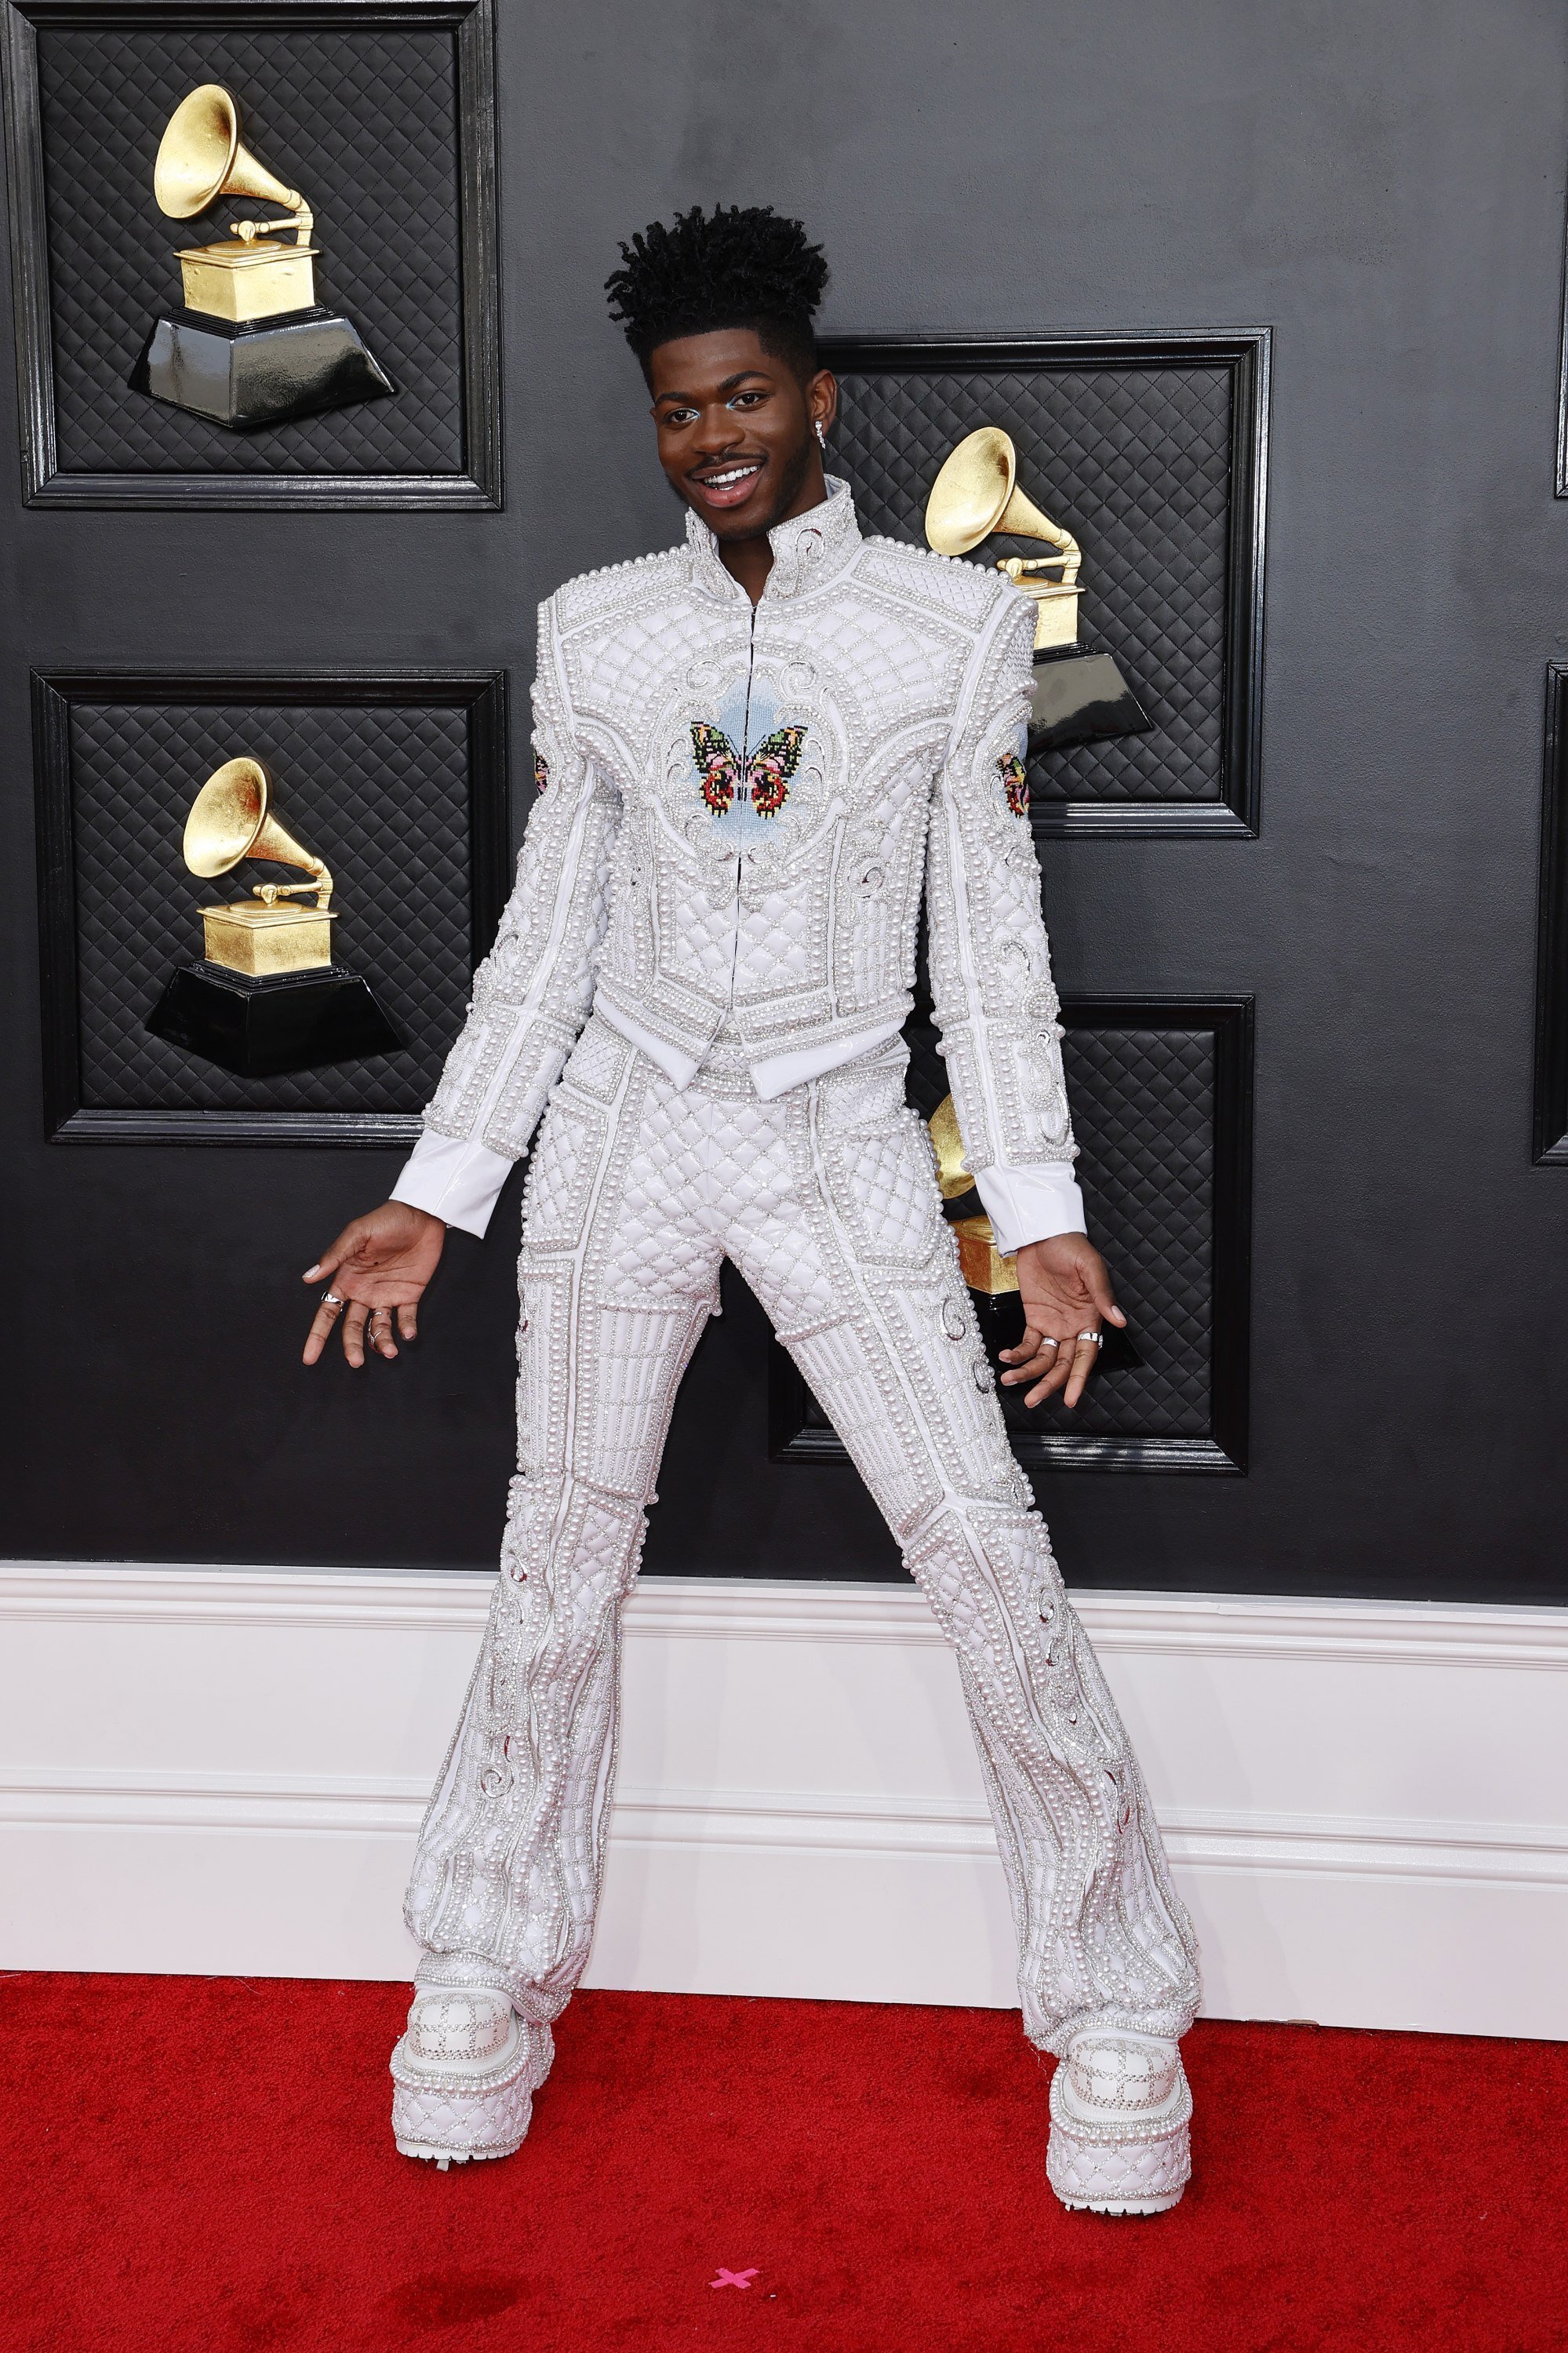 Leave it to Lil Nas X to wear one of the most notable outfits of the night. Photo: EPA-EFE